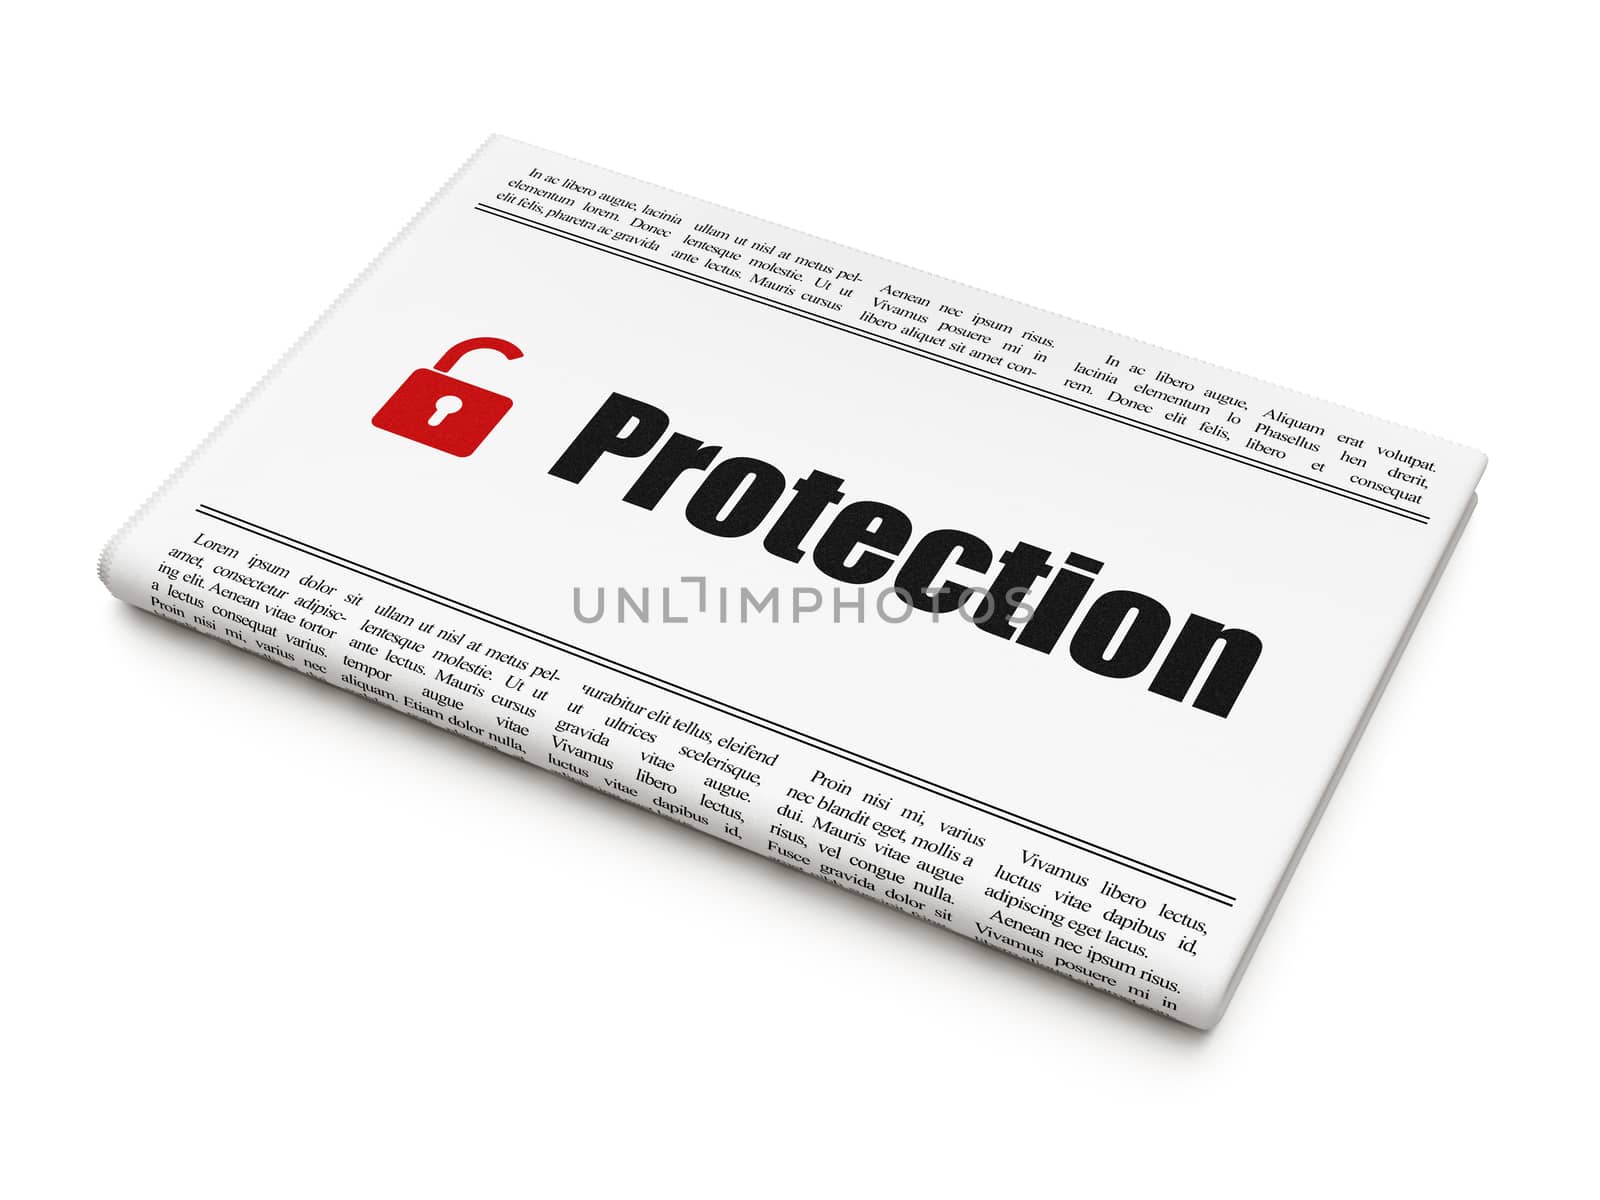 Protection news concept: newspaper headline Protection and Opened Padlock icon on White background, 3d render